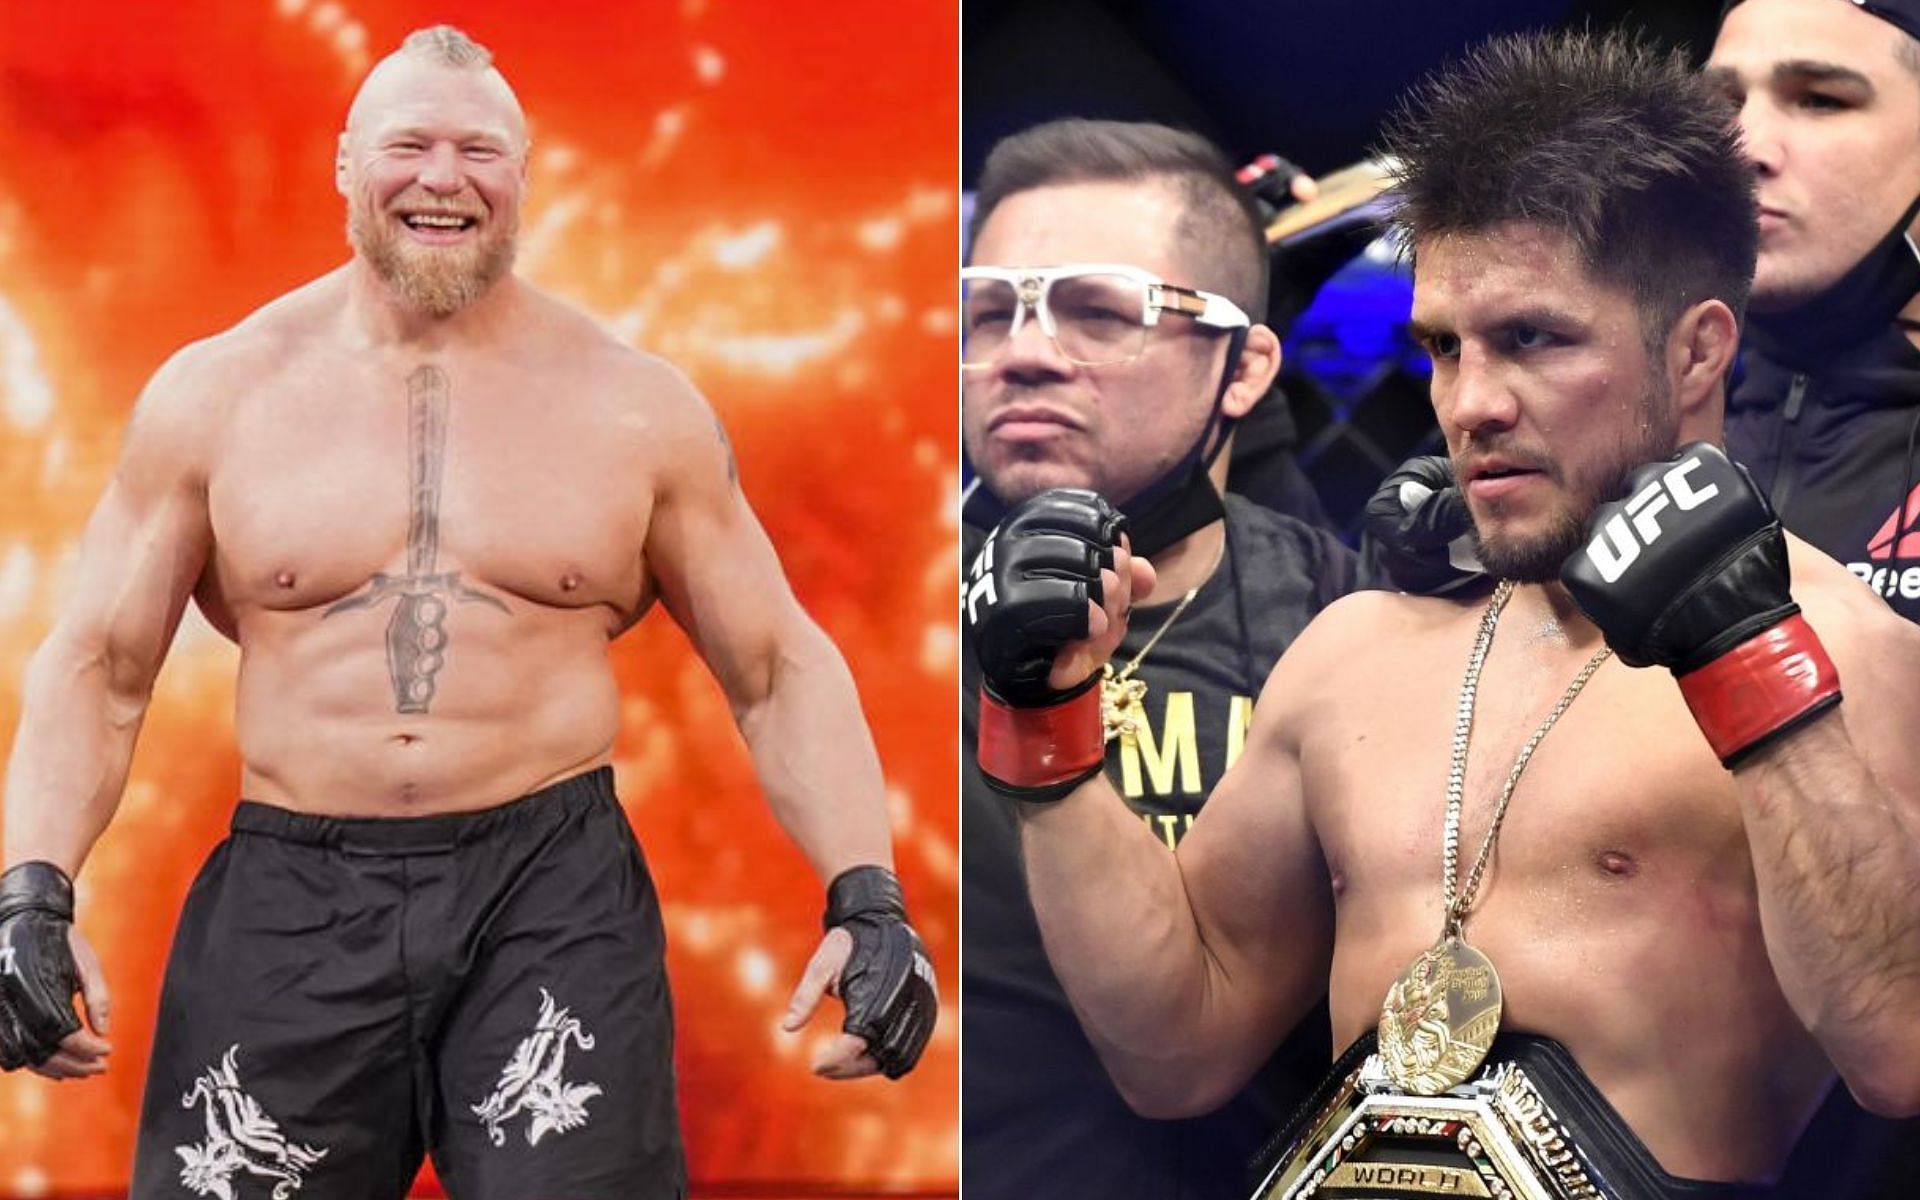 Brock Lesnar [Left], and Henry Cejudo [Right] [Photo credit: wwe.com]